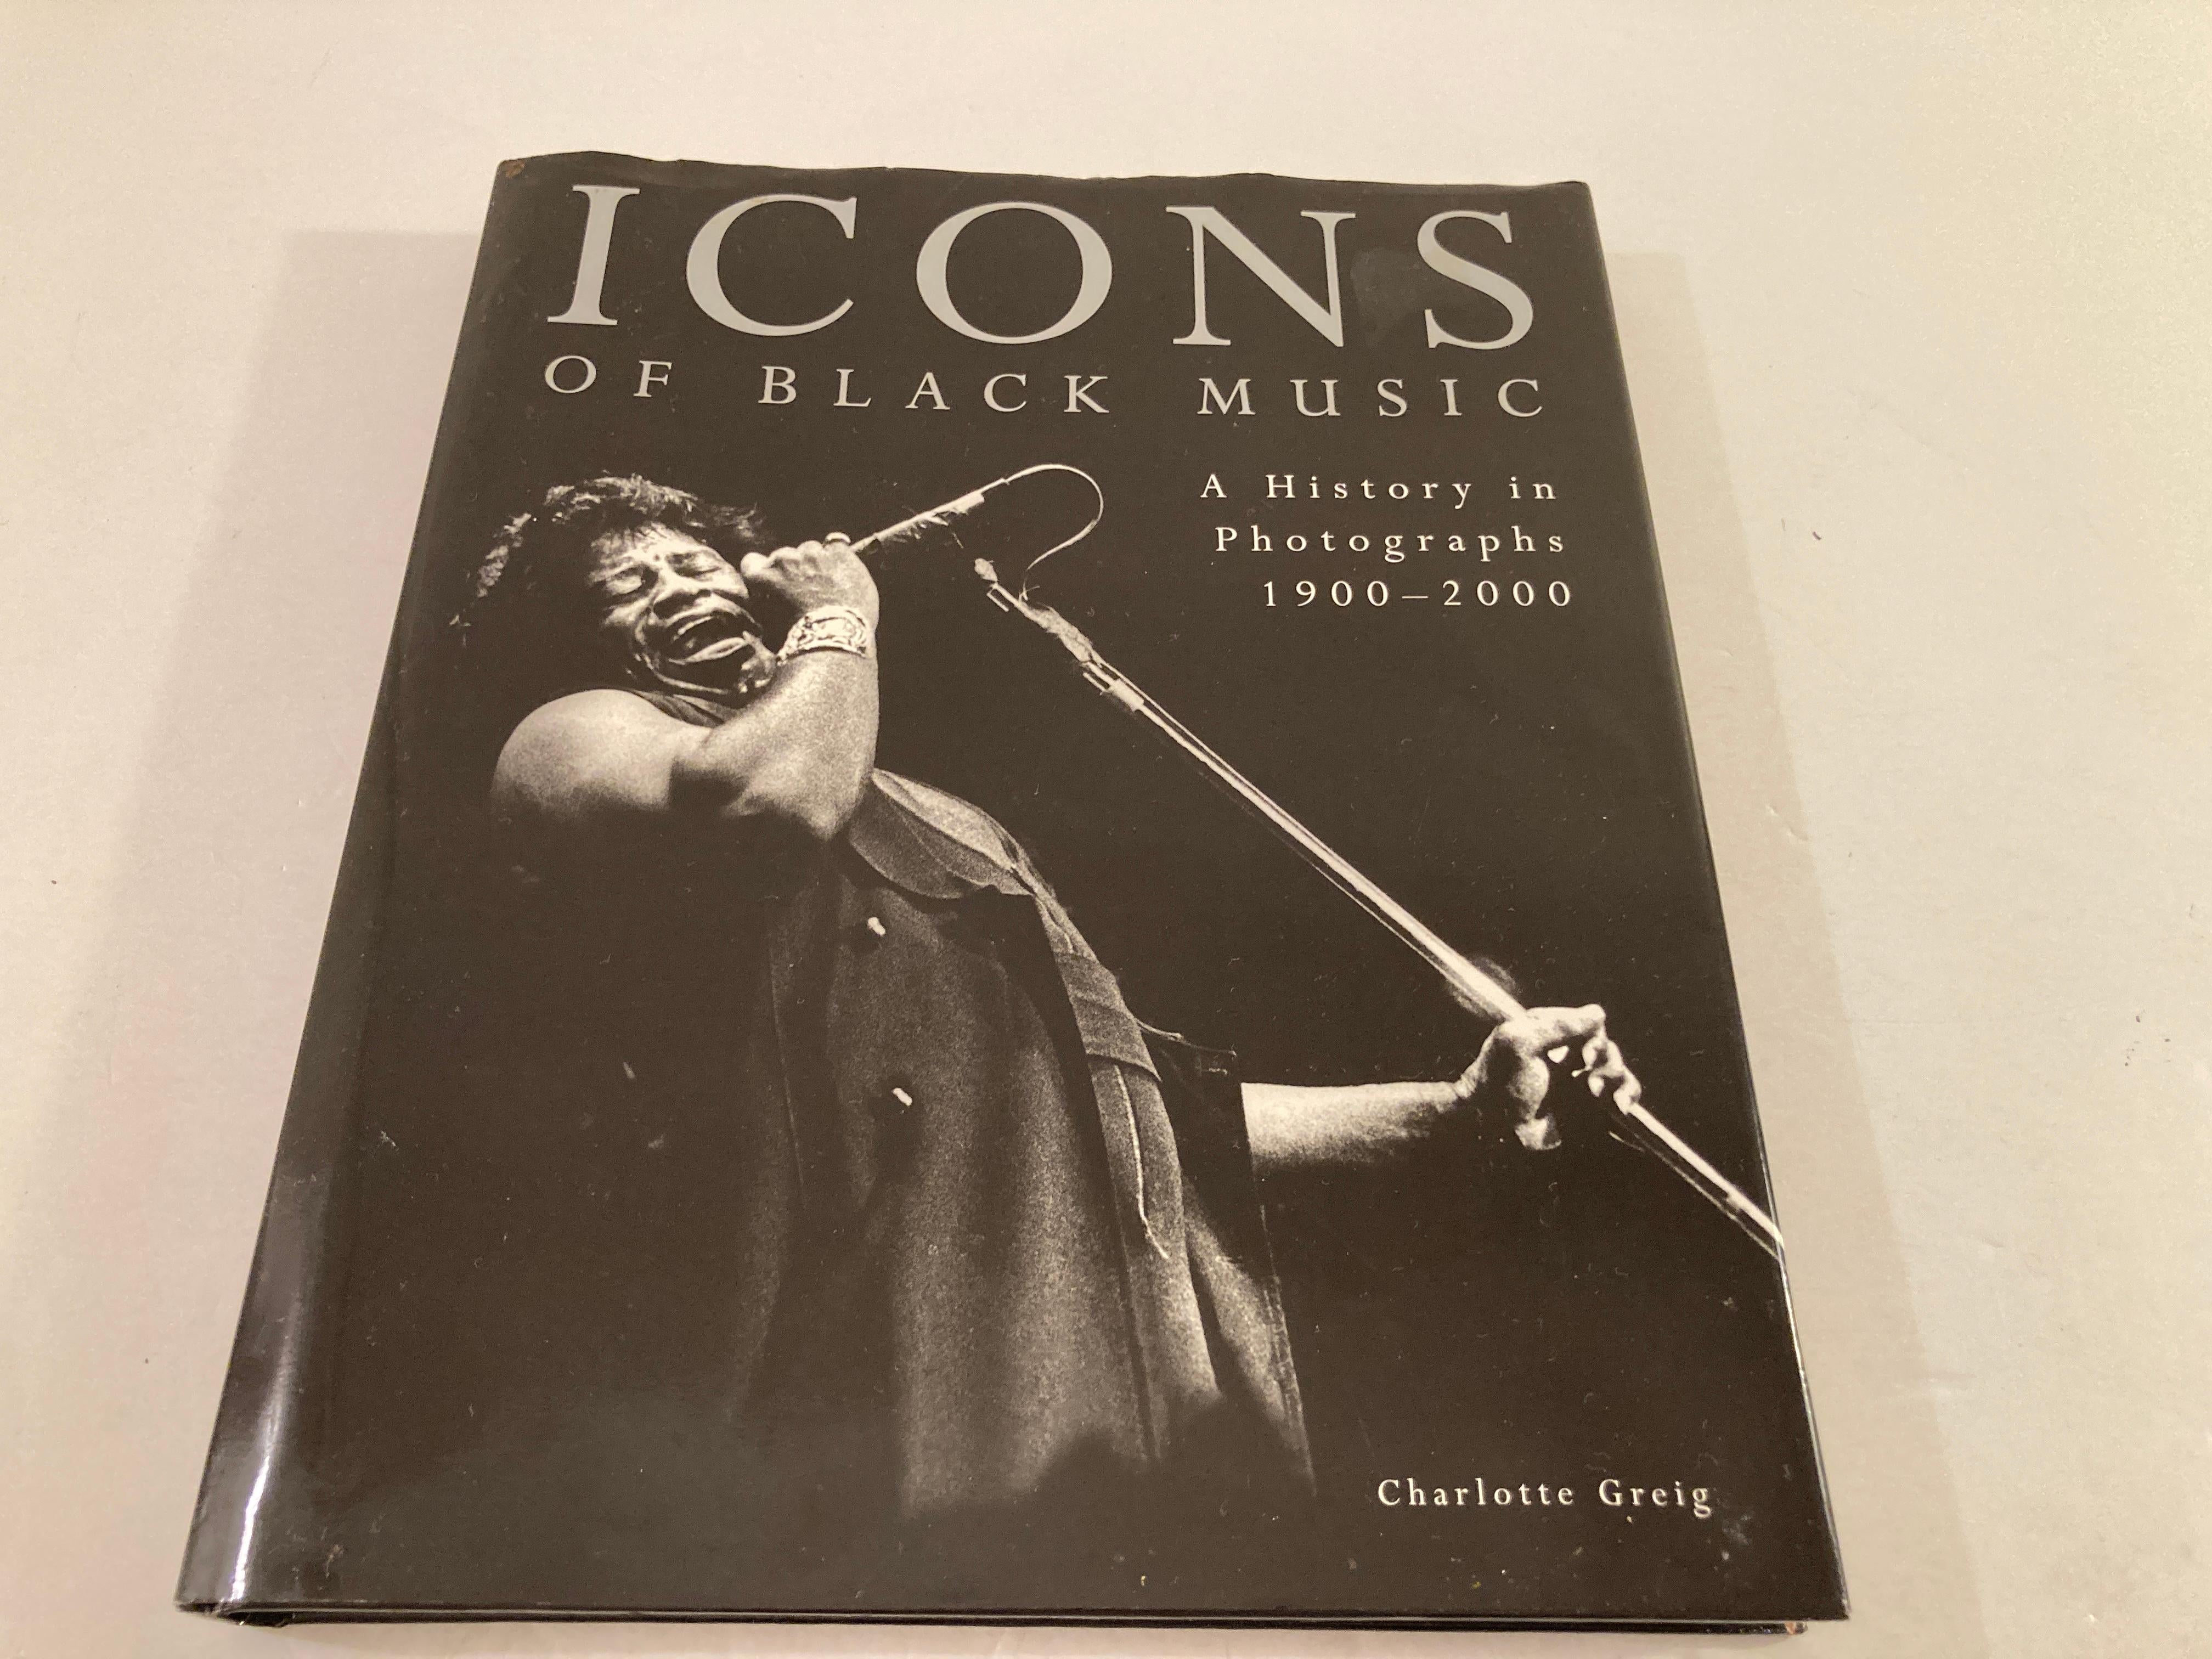 American Classical Icons Of Black Music A History In Photographs, 1900-2000 by Charlotte Greig